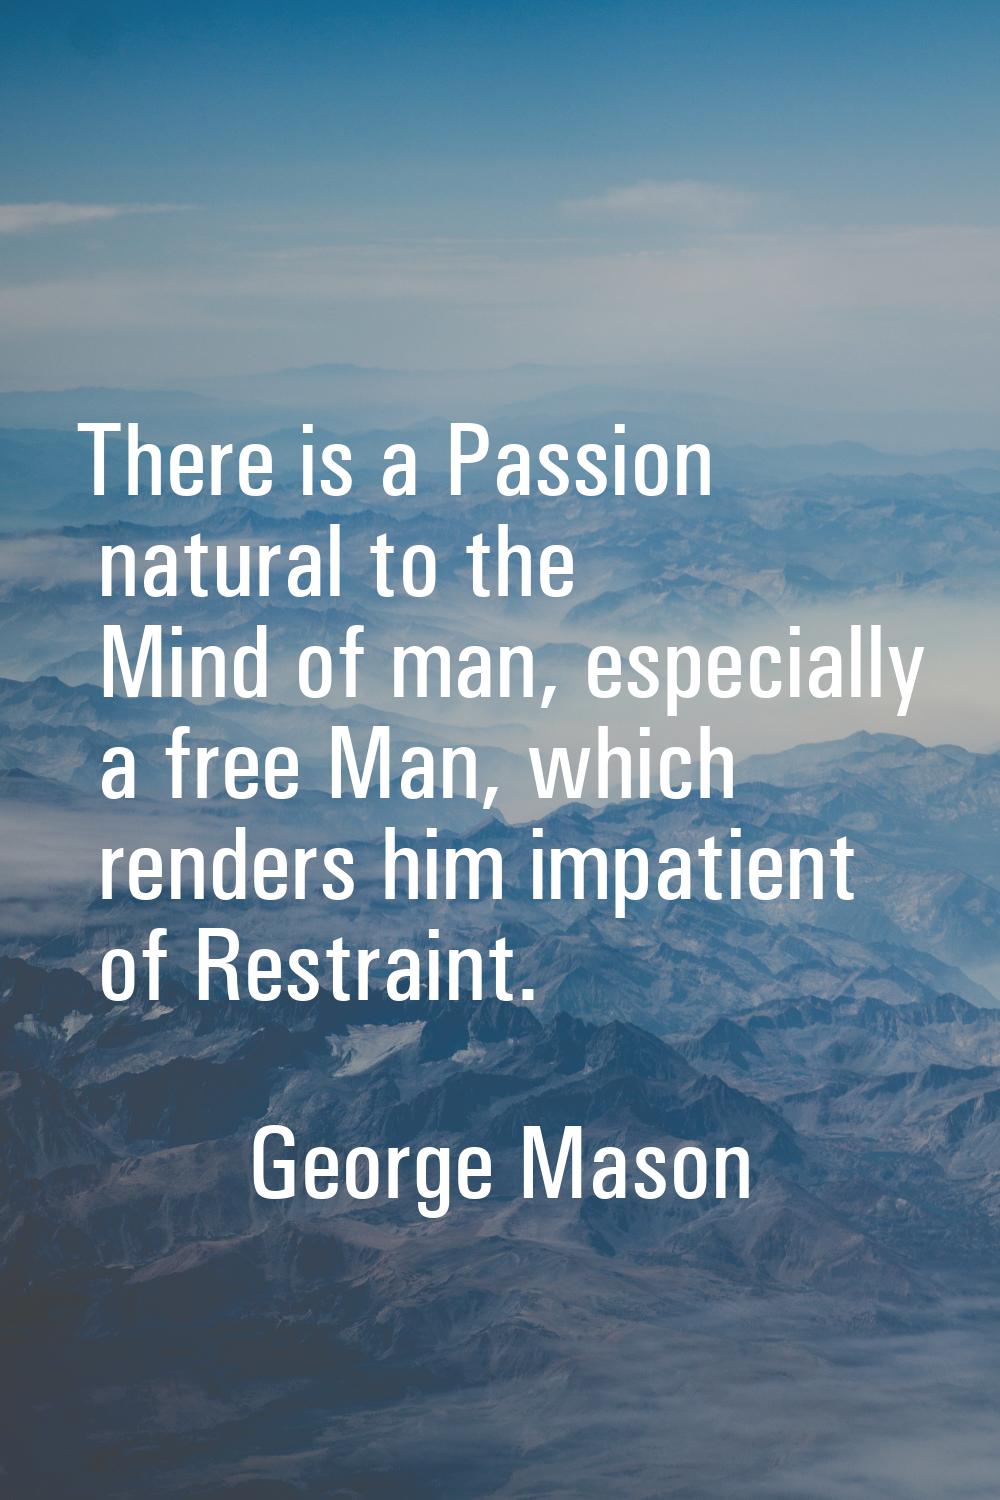 There is a Passion natural to the Mind of man, especially a free Man, which renders him impatient o